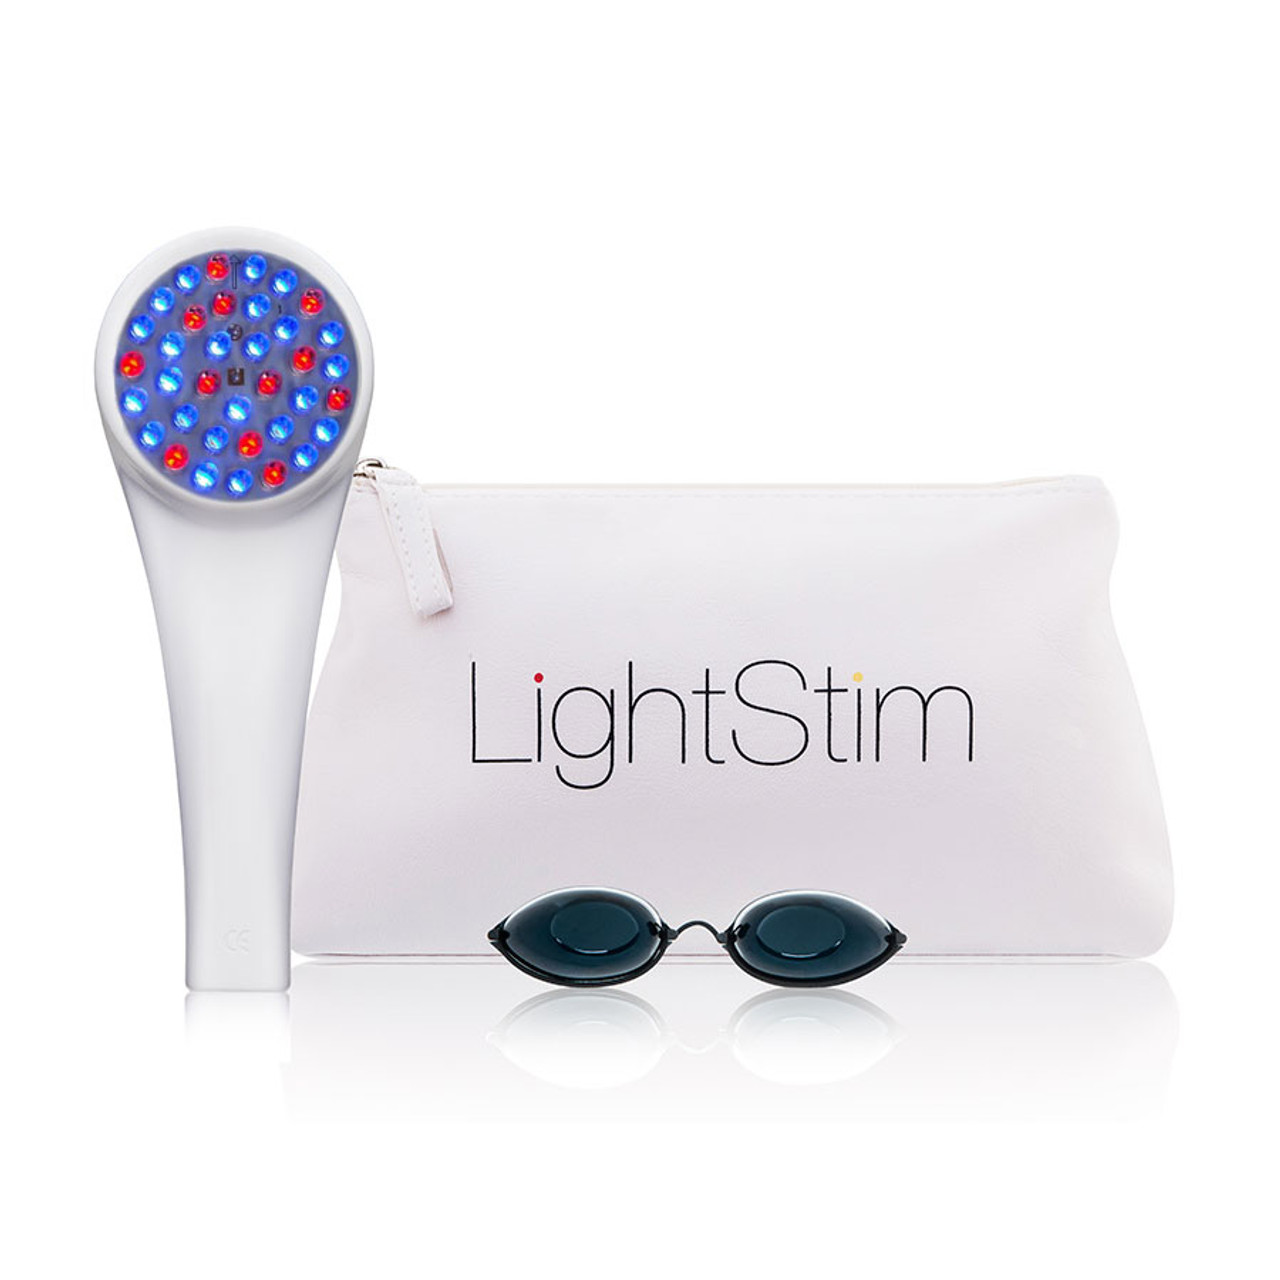 Lightstim For Acne Led Light Therapy Device Skin Truth